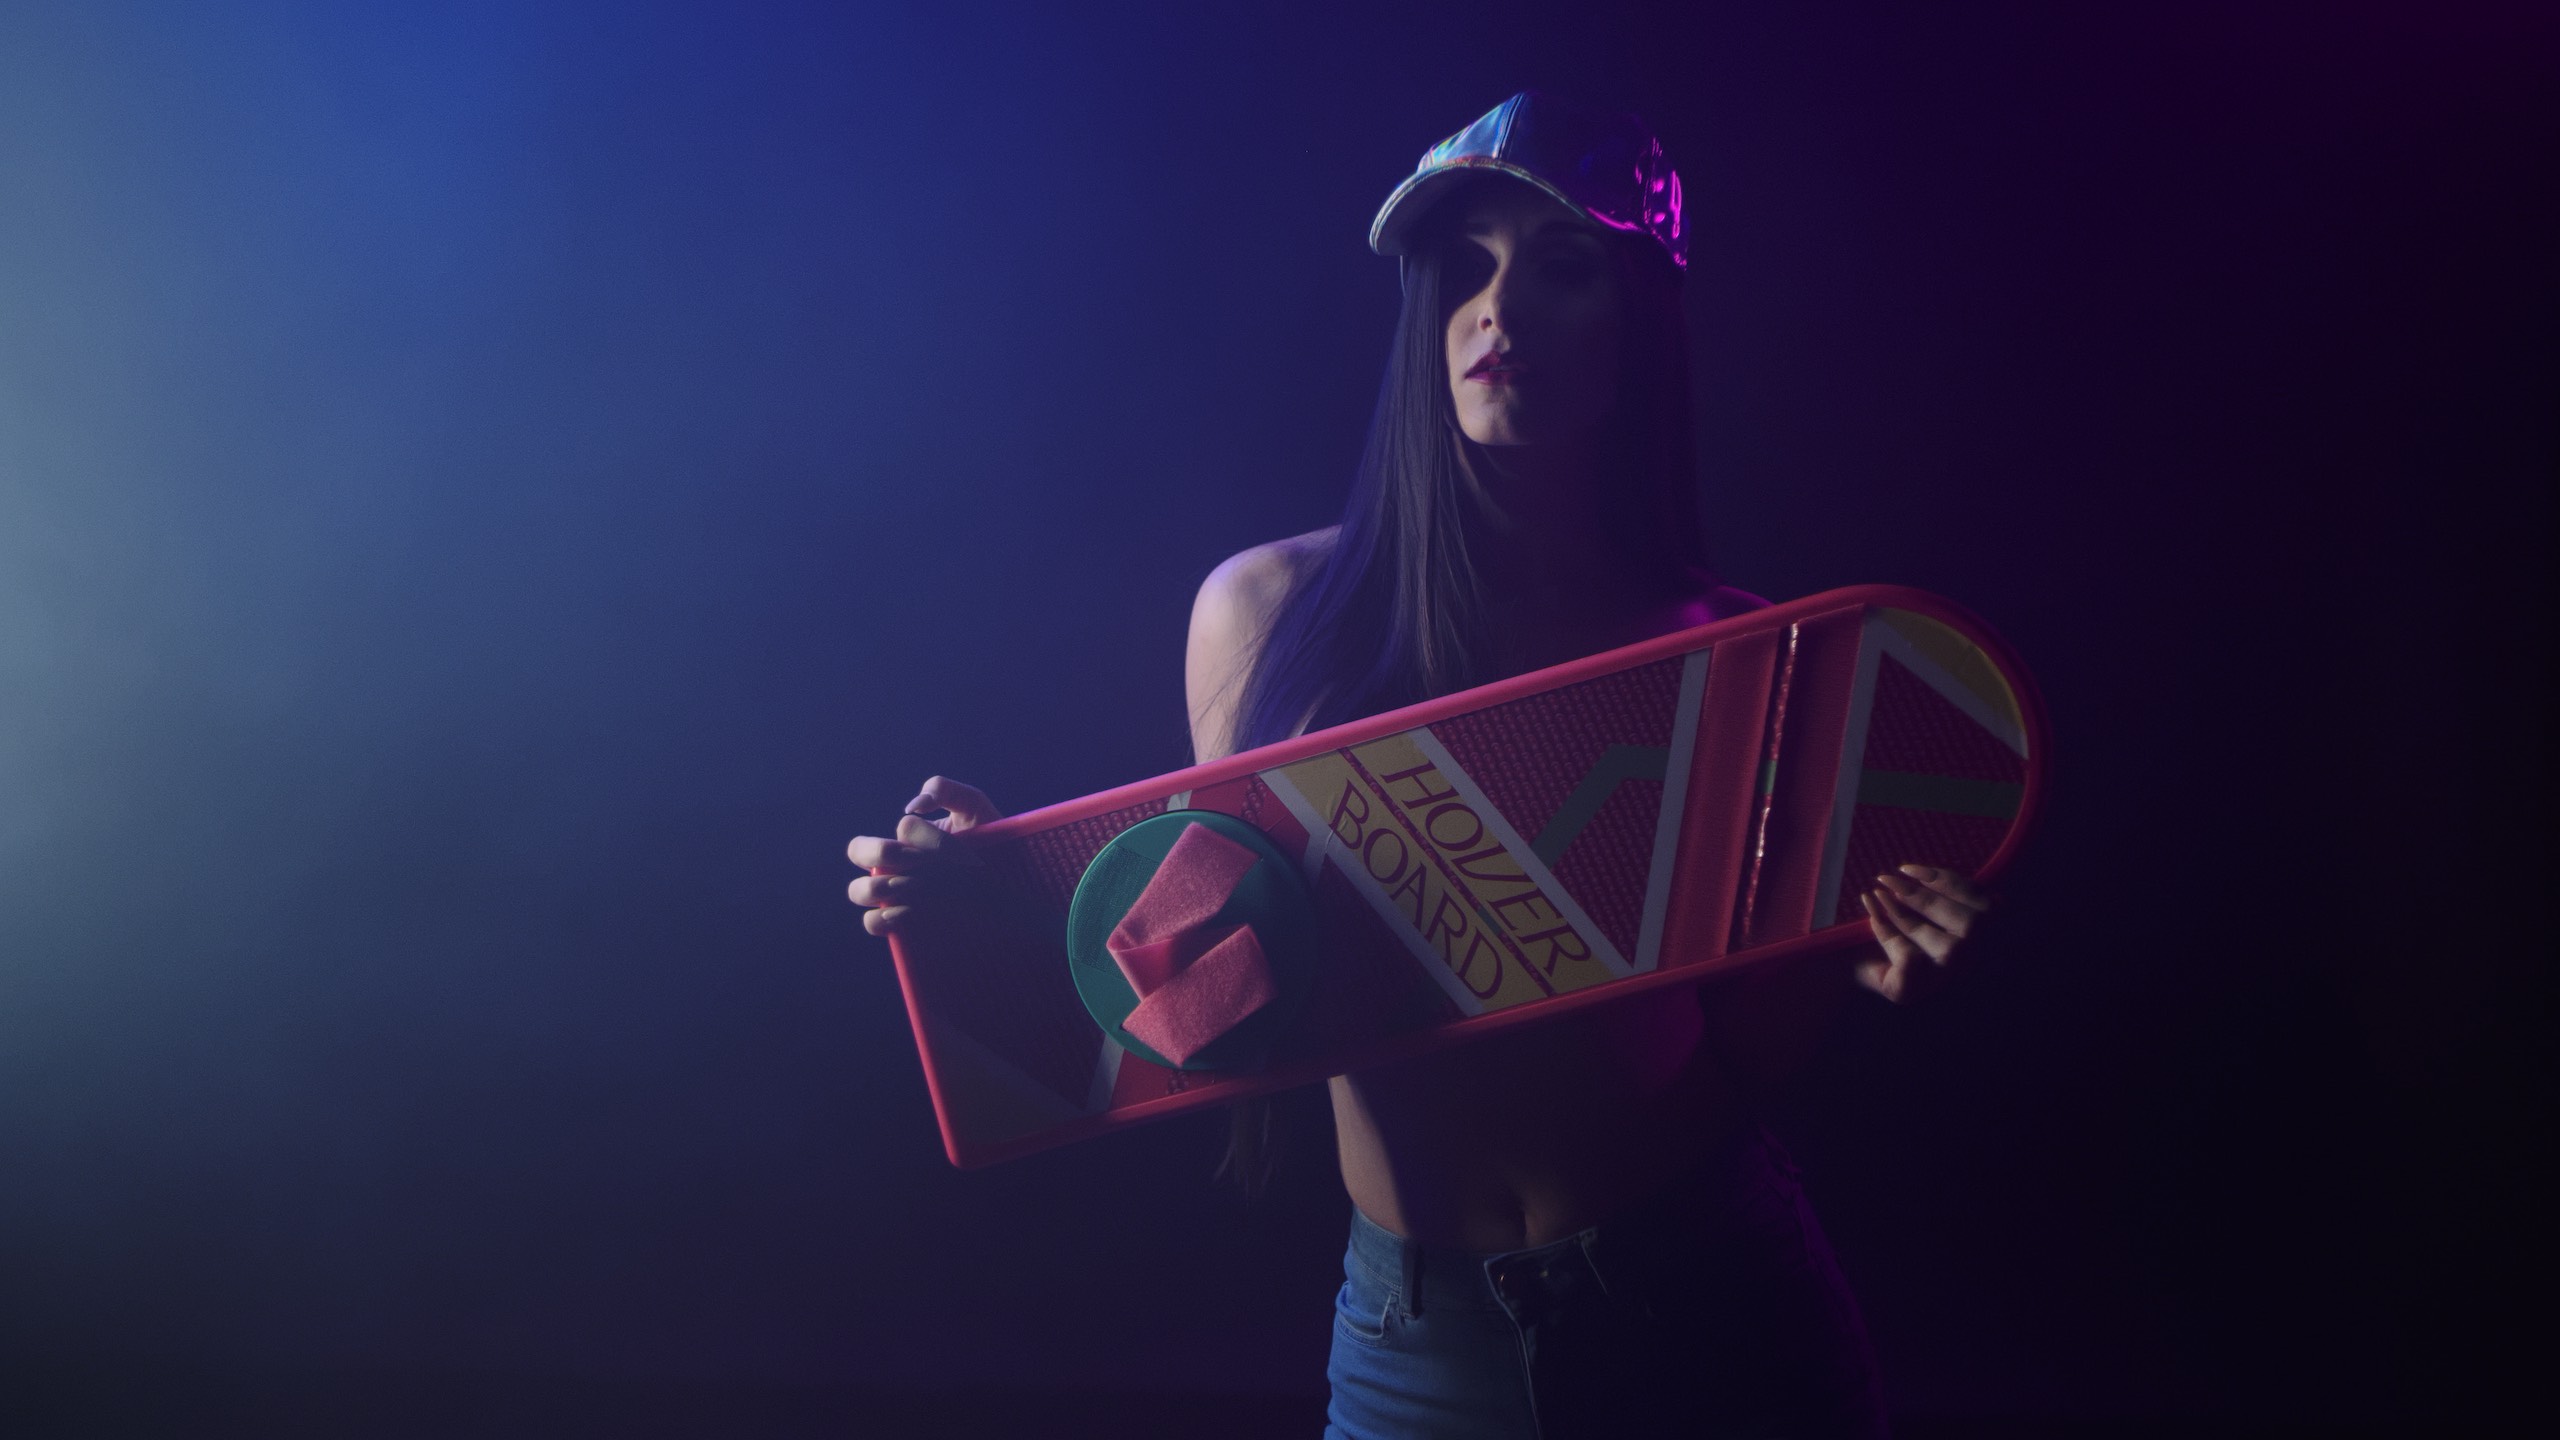 The Delorean Uncreative Music Woman holding a hover board and wearing a multicolored cap and jeans in semi darkness